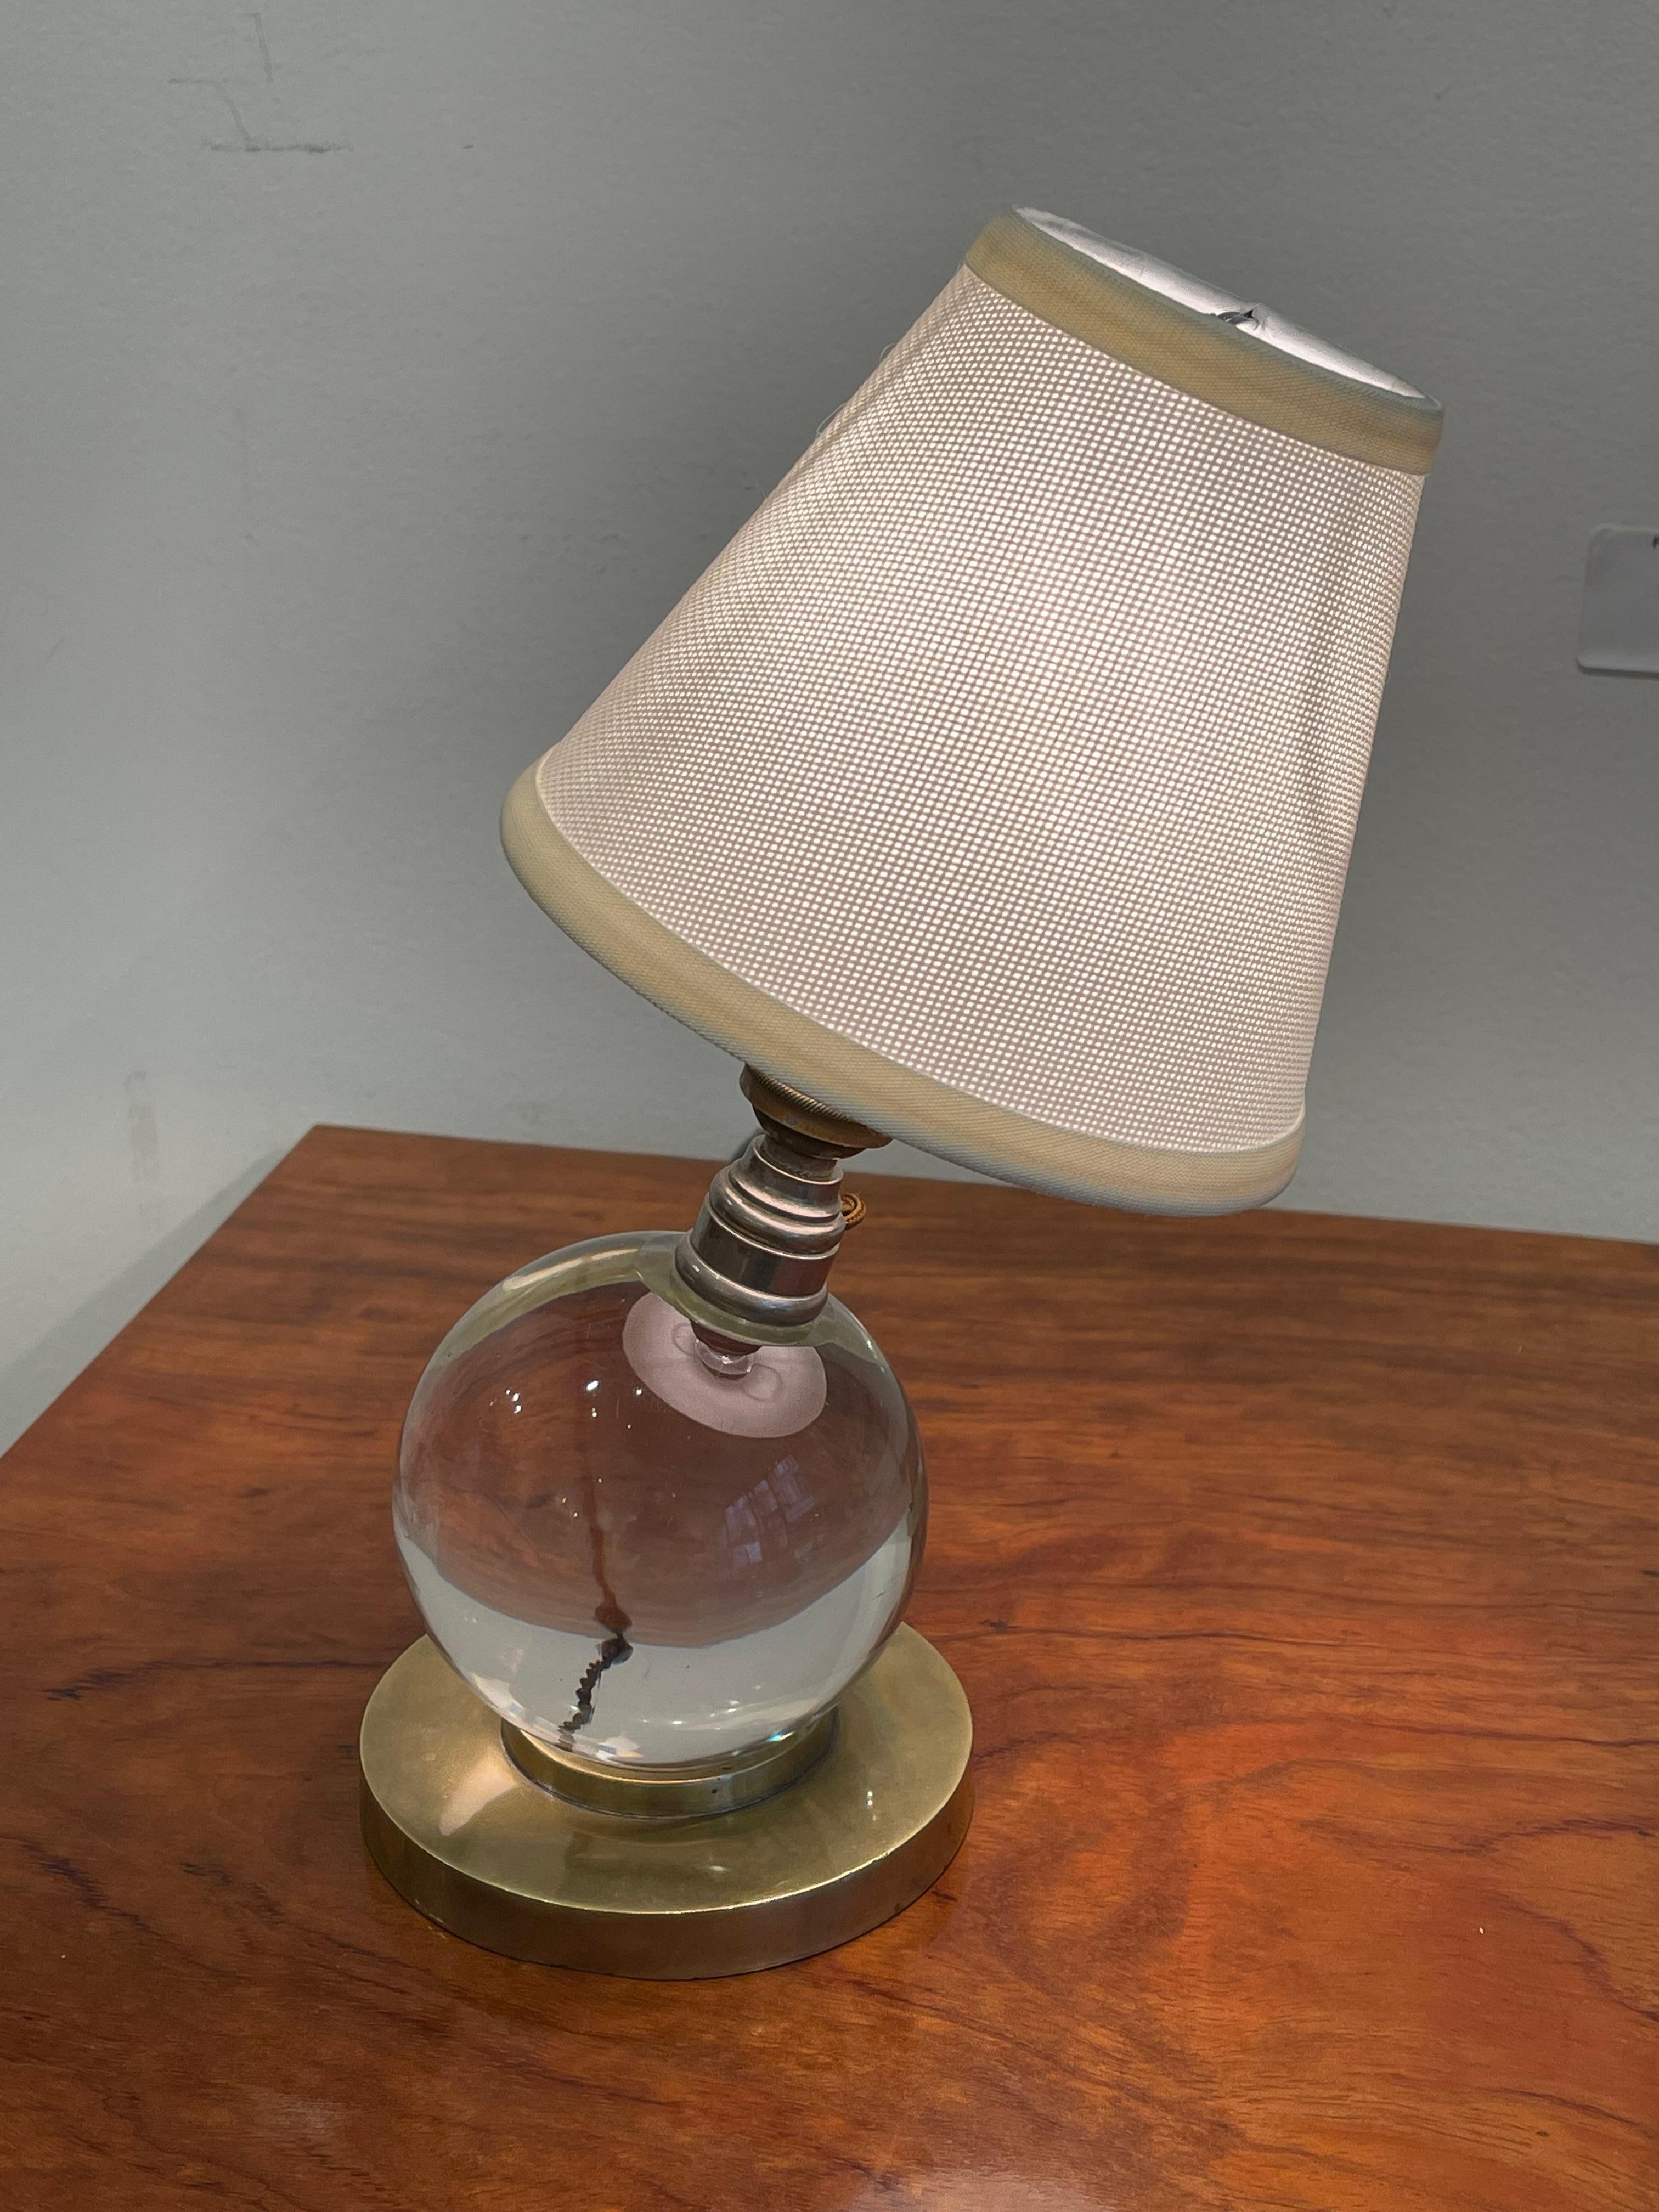 Iconic Modernist Table Lamp by Jacques Adnet for Baccarat, 1930s, Art Deco 1